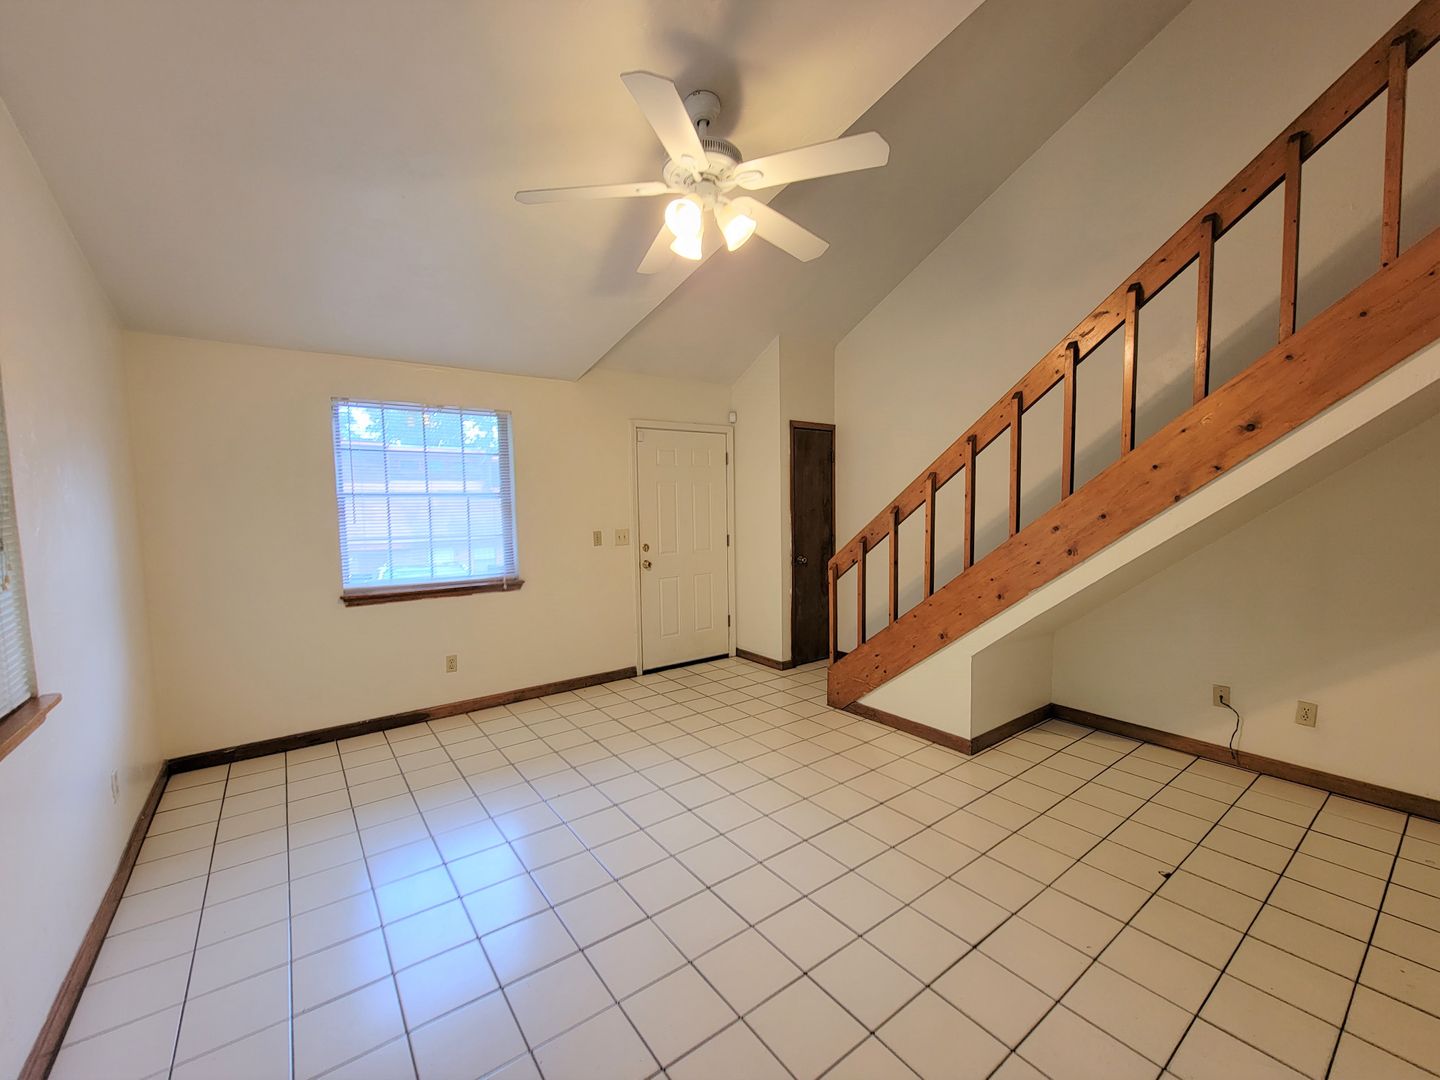 3 town home across from FSU Campus/ all ceramic tile/ wood floors for rent early August 2024 for $1450 per month